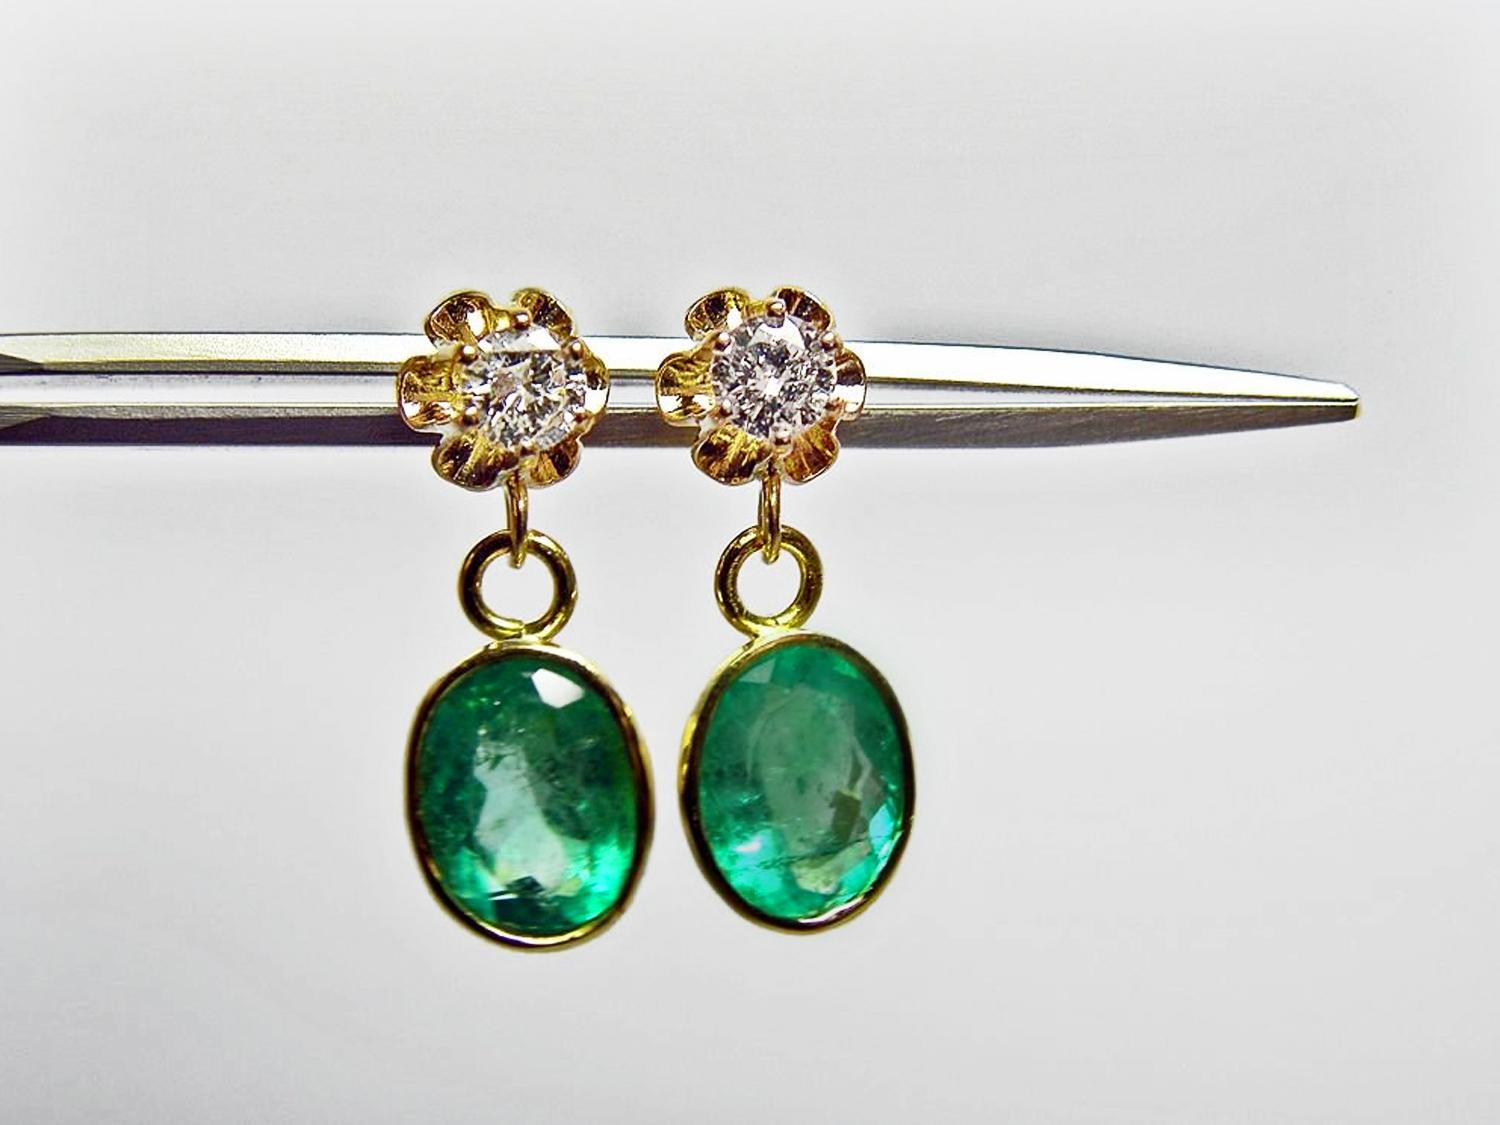 Timeless 4.60 Carat Estate Natural Colombian Emerald and  Diamond Dangle Drop Earrings 18K Yellow Gold 
Primary Stones: 4.00cts 100%Natural Colombian Emeralds
Shape or Cut :  Oval Cut
Average Color/Clarity Emerald : Medium Green Color/ Clarity VS
